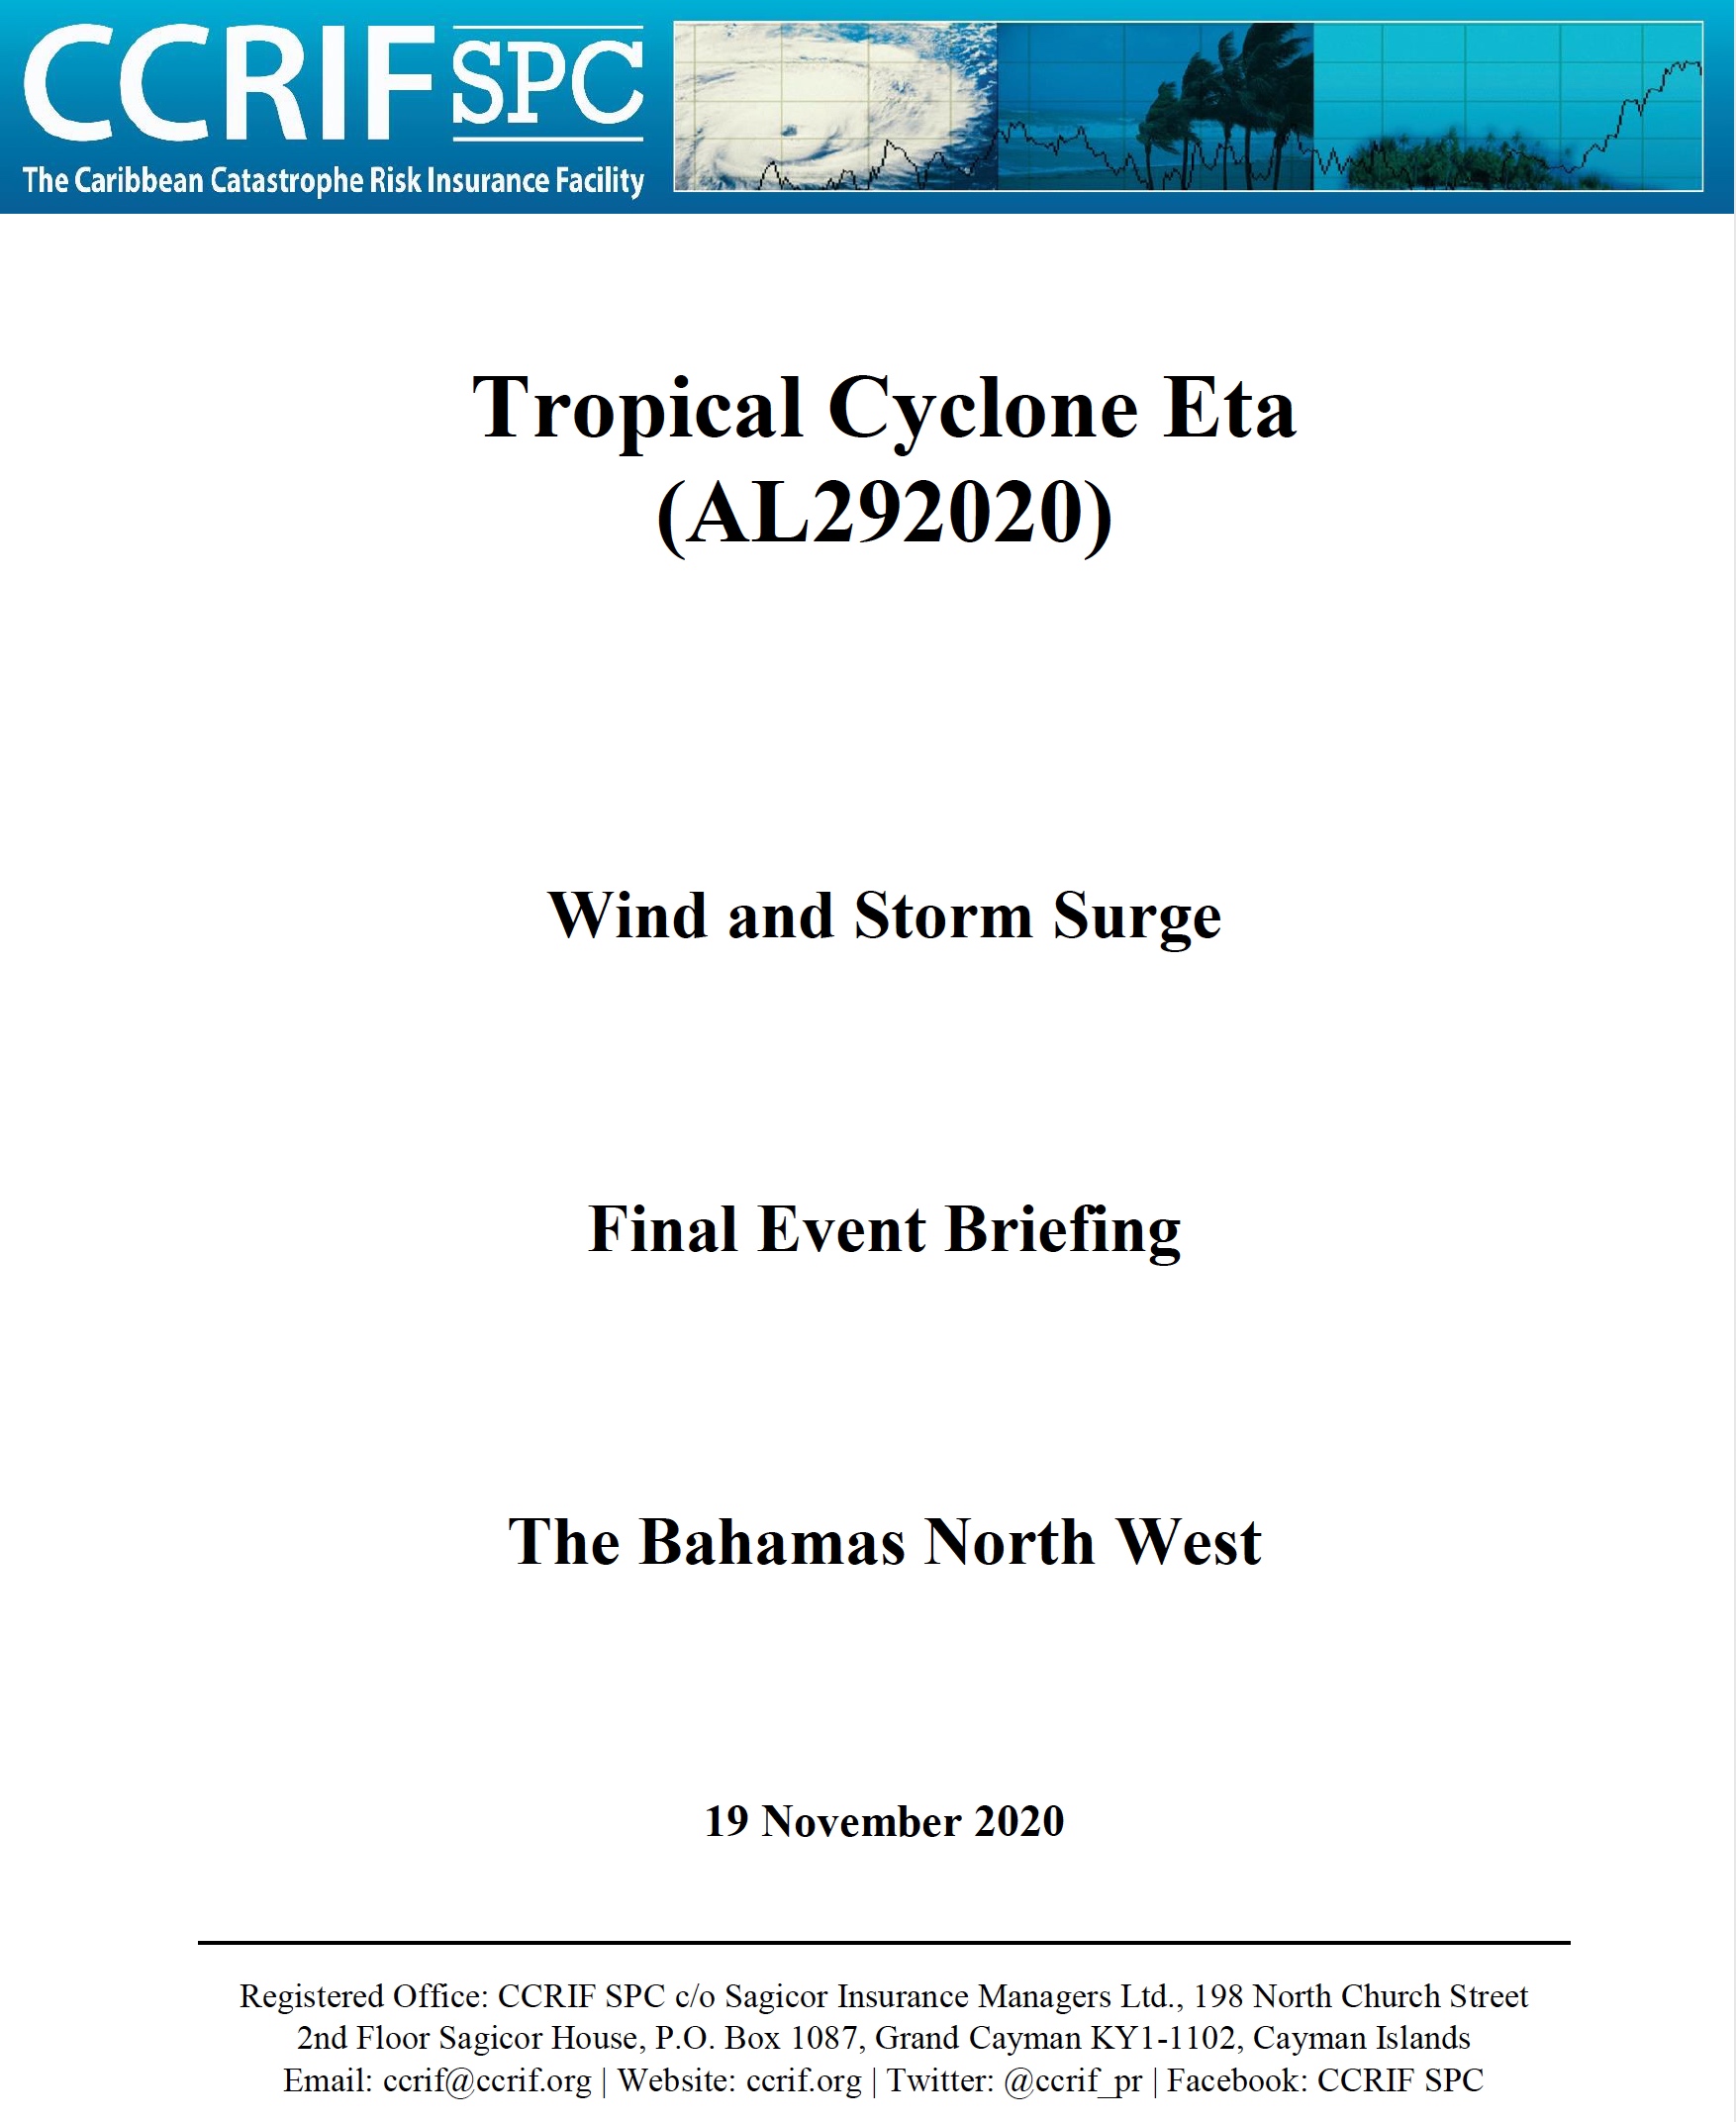 Event Briefing - TC Eta - Wind and Storm Surge - The Bahamas North West - November 19 2020